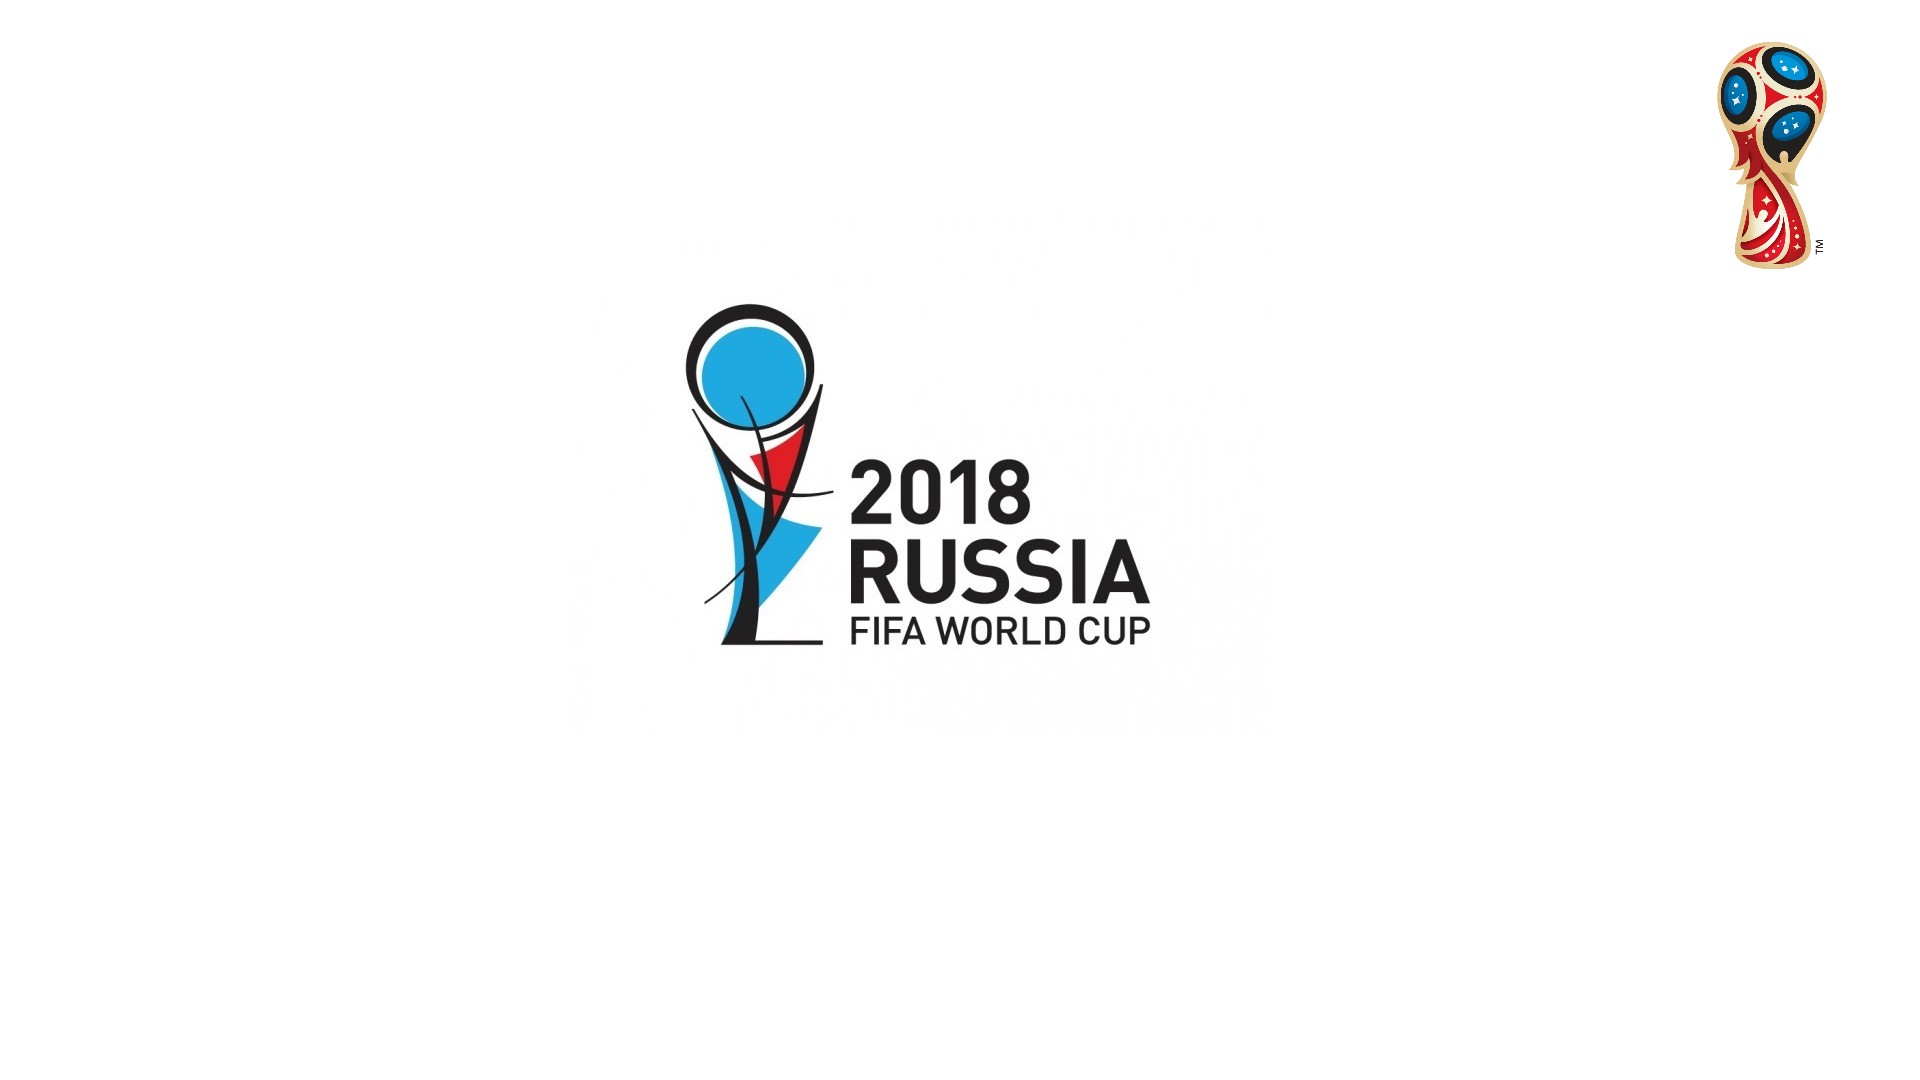 FIFA World Cup Desktop Wallpapers with resolution 1920x1080 pixel. You can make this wallpaper for your Mac or Windows Desktop Background, iPhone, Android or Tablet and another Smartphone device